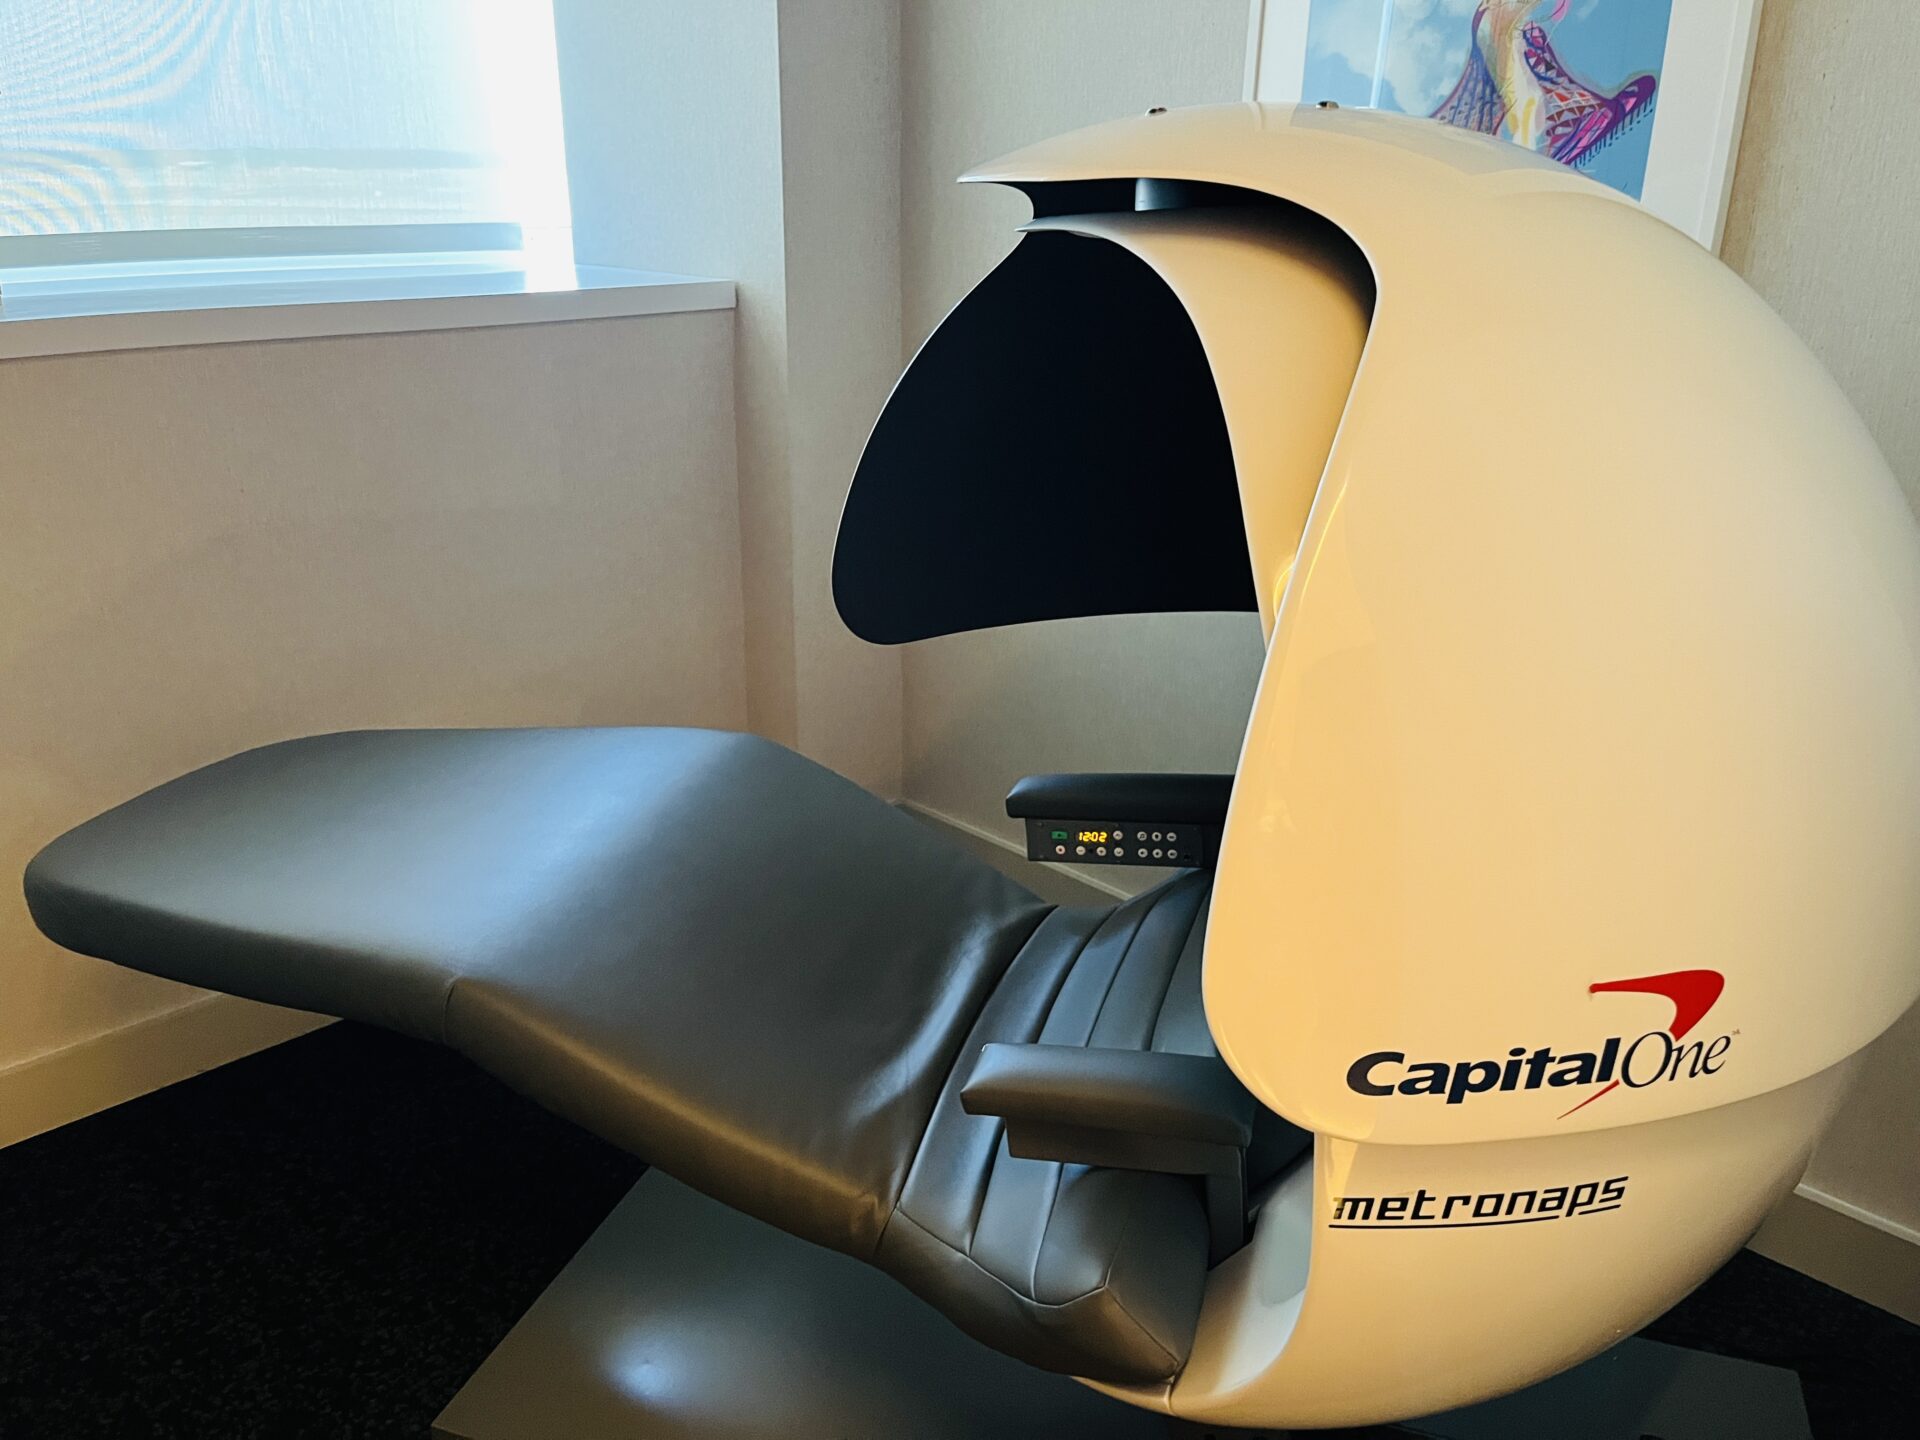 Capital One Airport Lounges Access Rules, Fees & Guest Policy